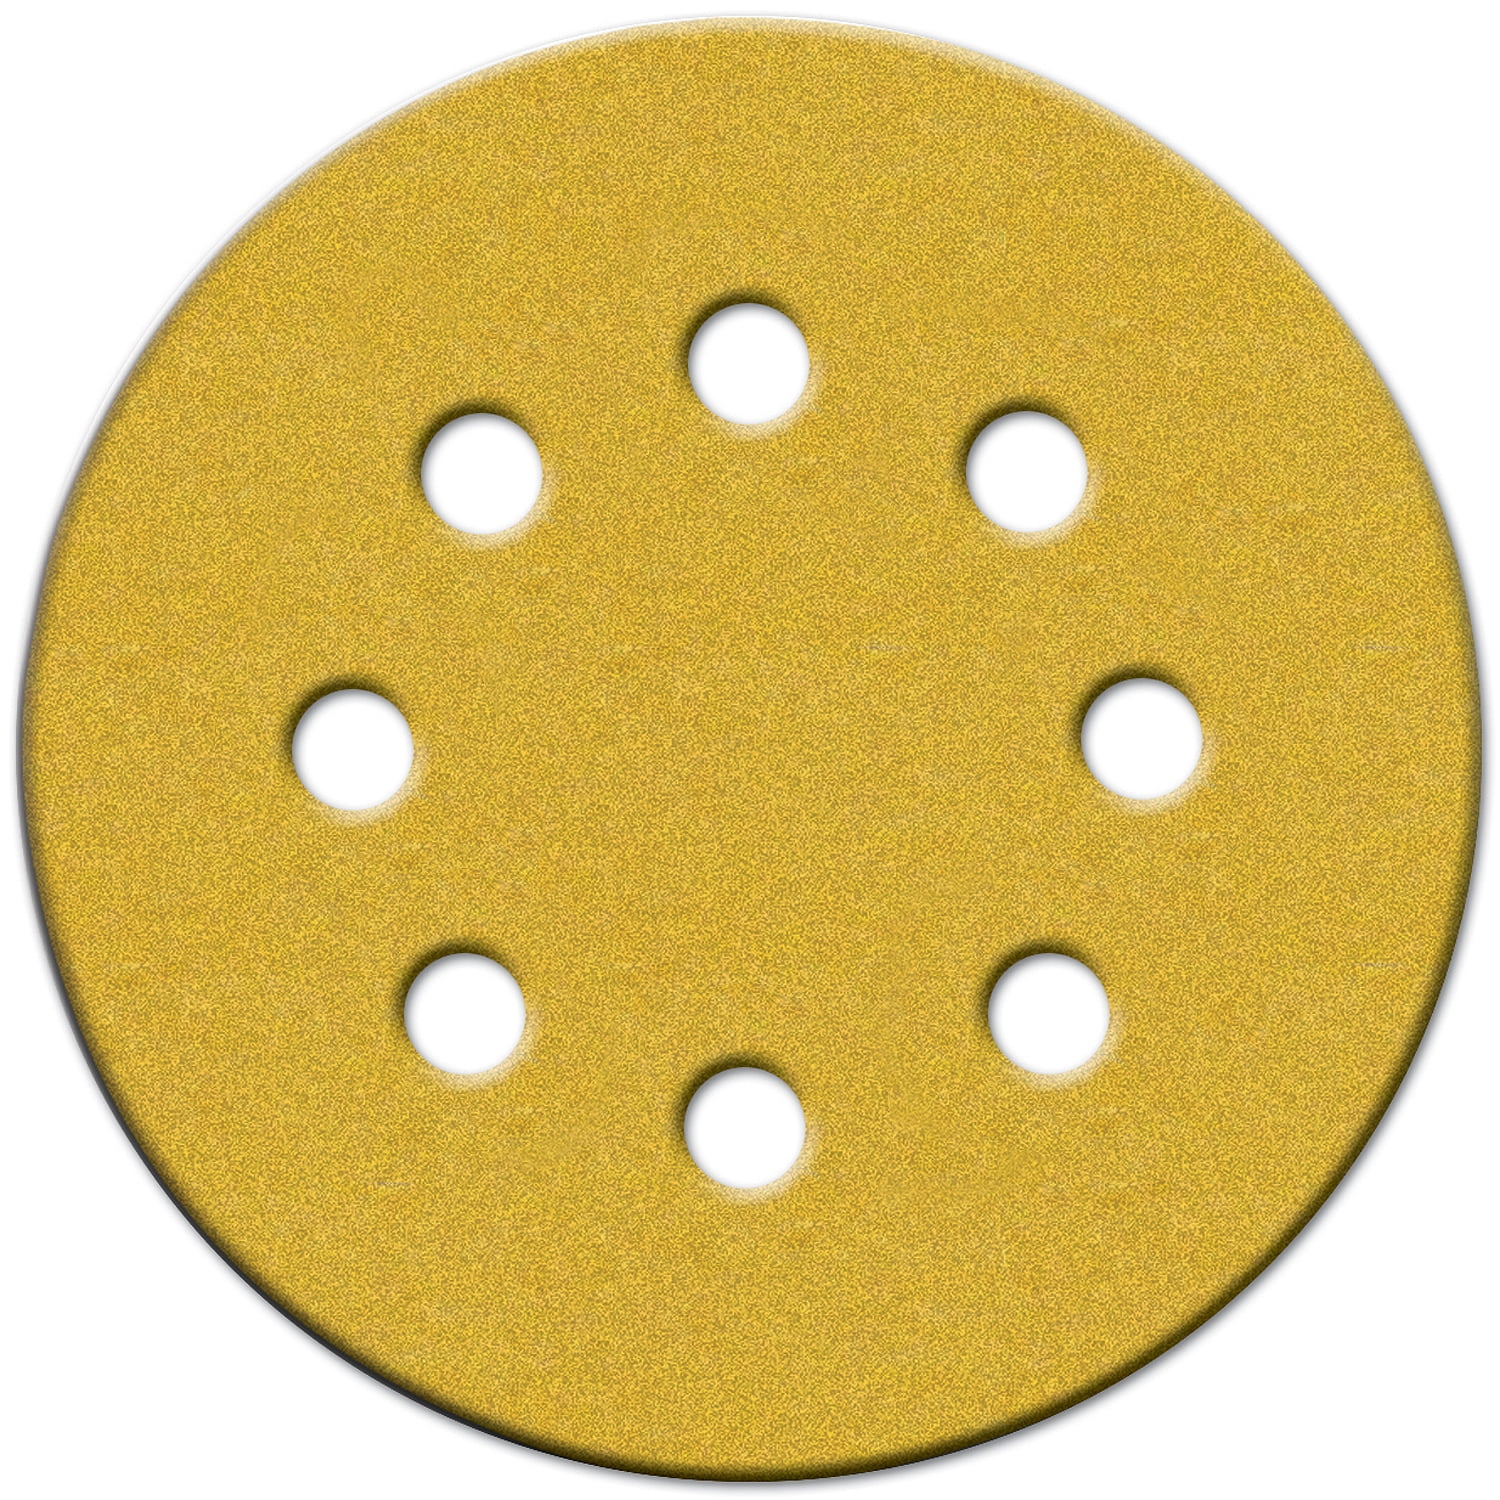 5-Inch 3-Pack Norton 03228 3X Hook and Sand 180 Grit Universal Vac Hole Sanding Disc